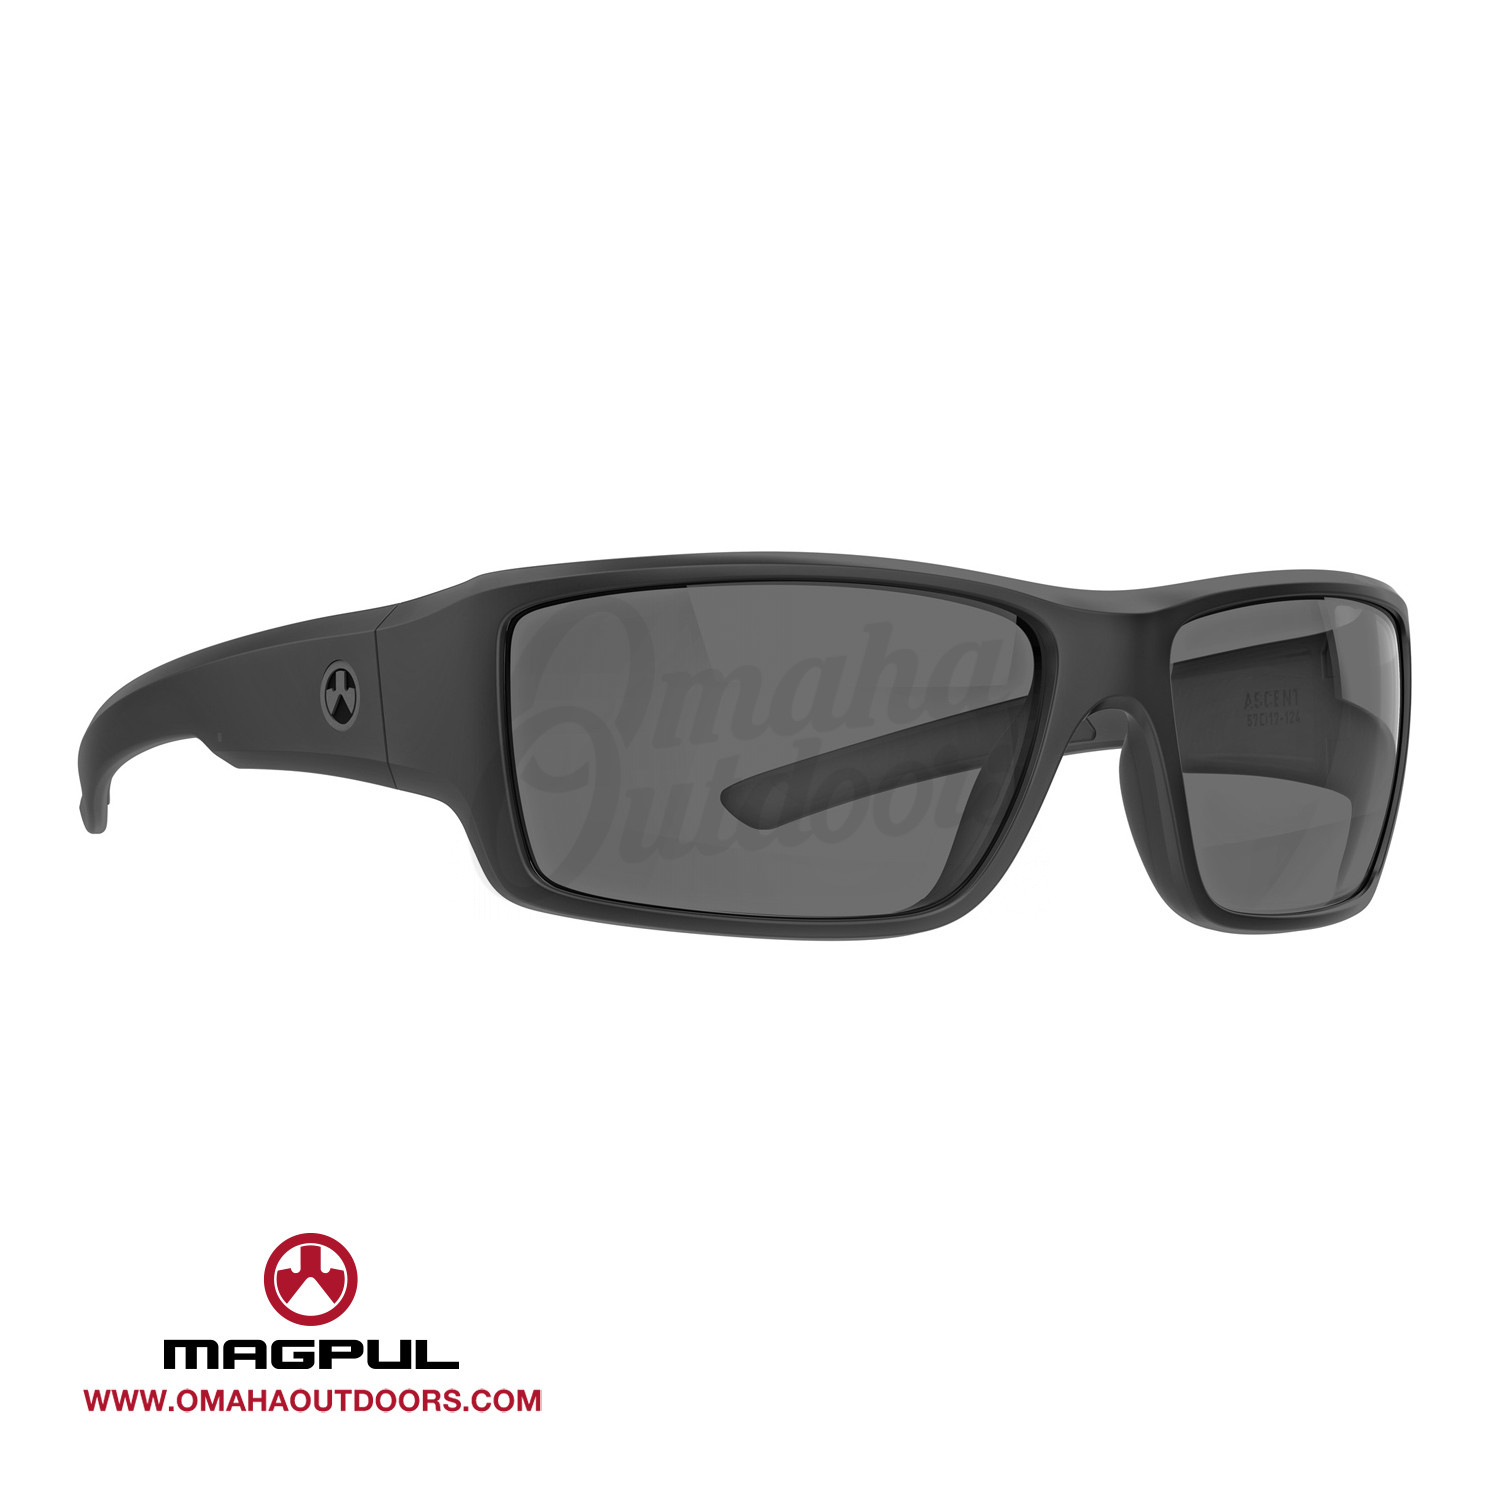 - In Sunglasses Lens Stock Gray Magpul Ascent Green